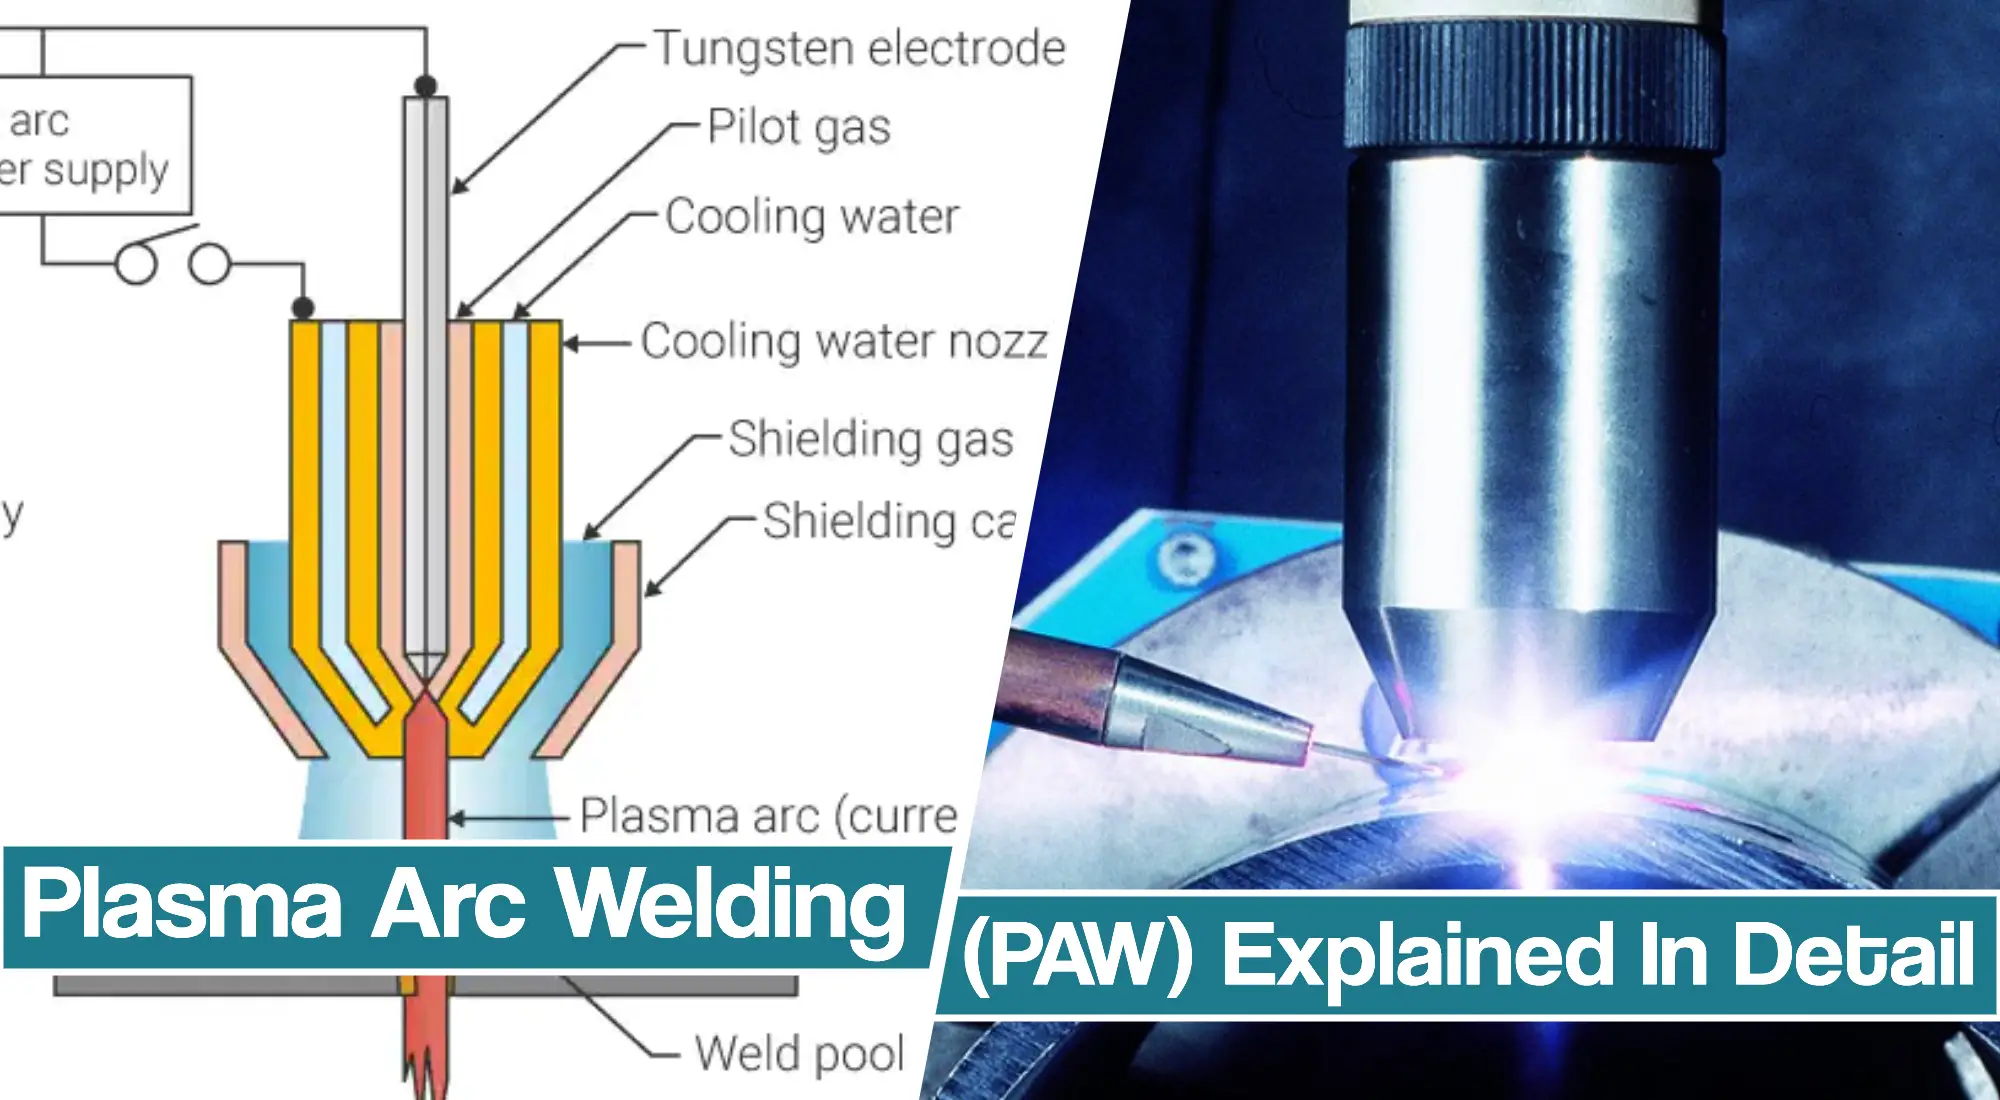 Featured image for the plasma arc welding article